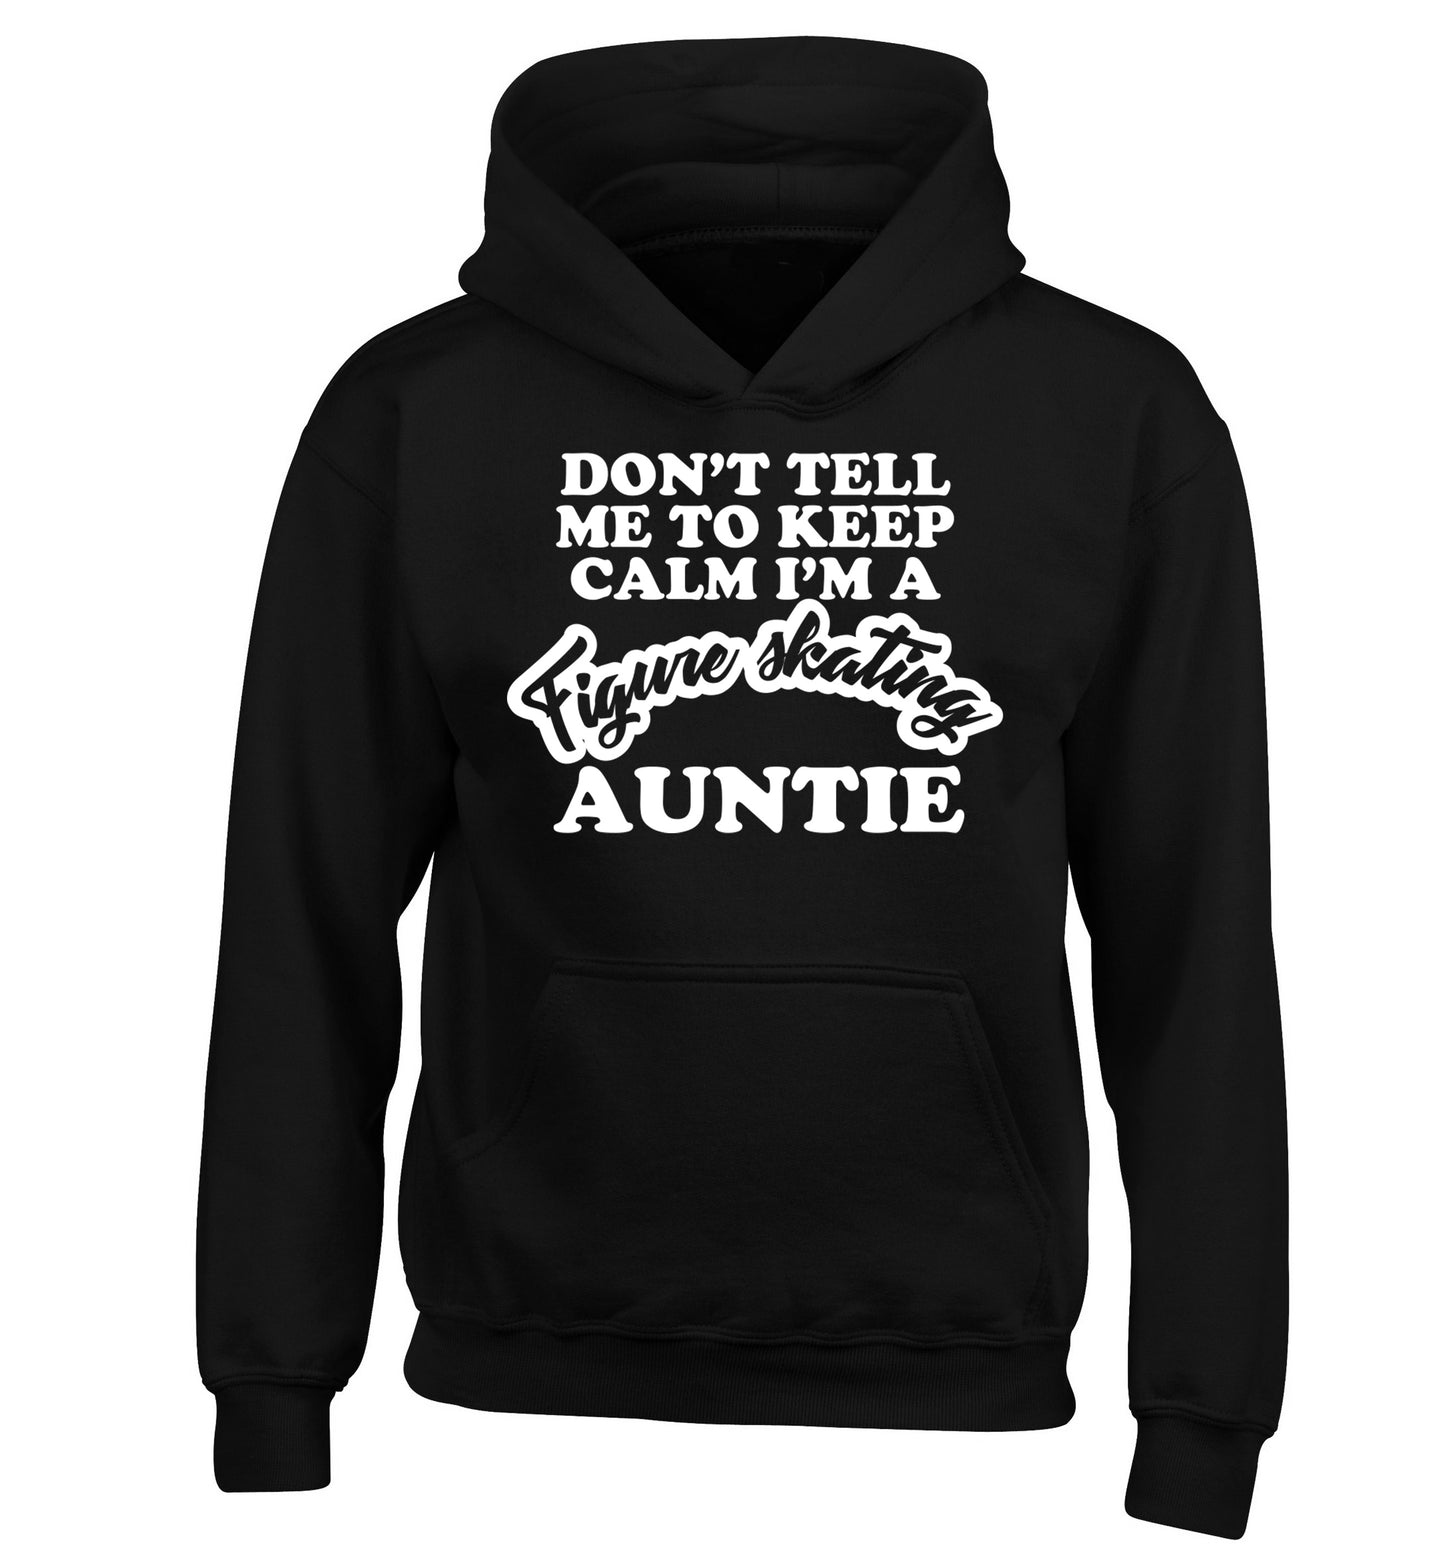 Don't tell me to keep calm I'm a figure skating auntie children's black hoodie 12-14 Years